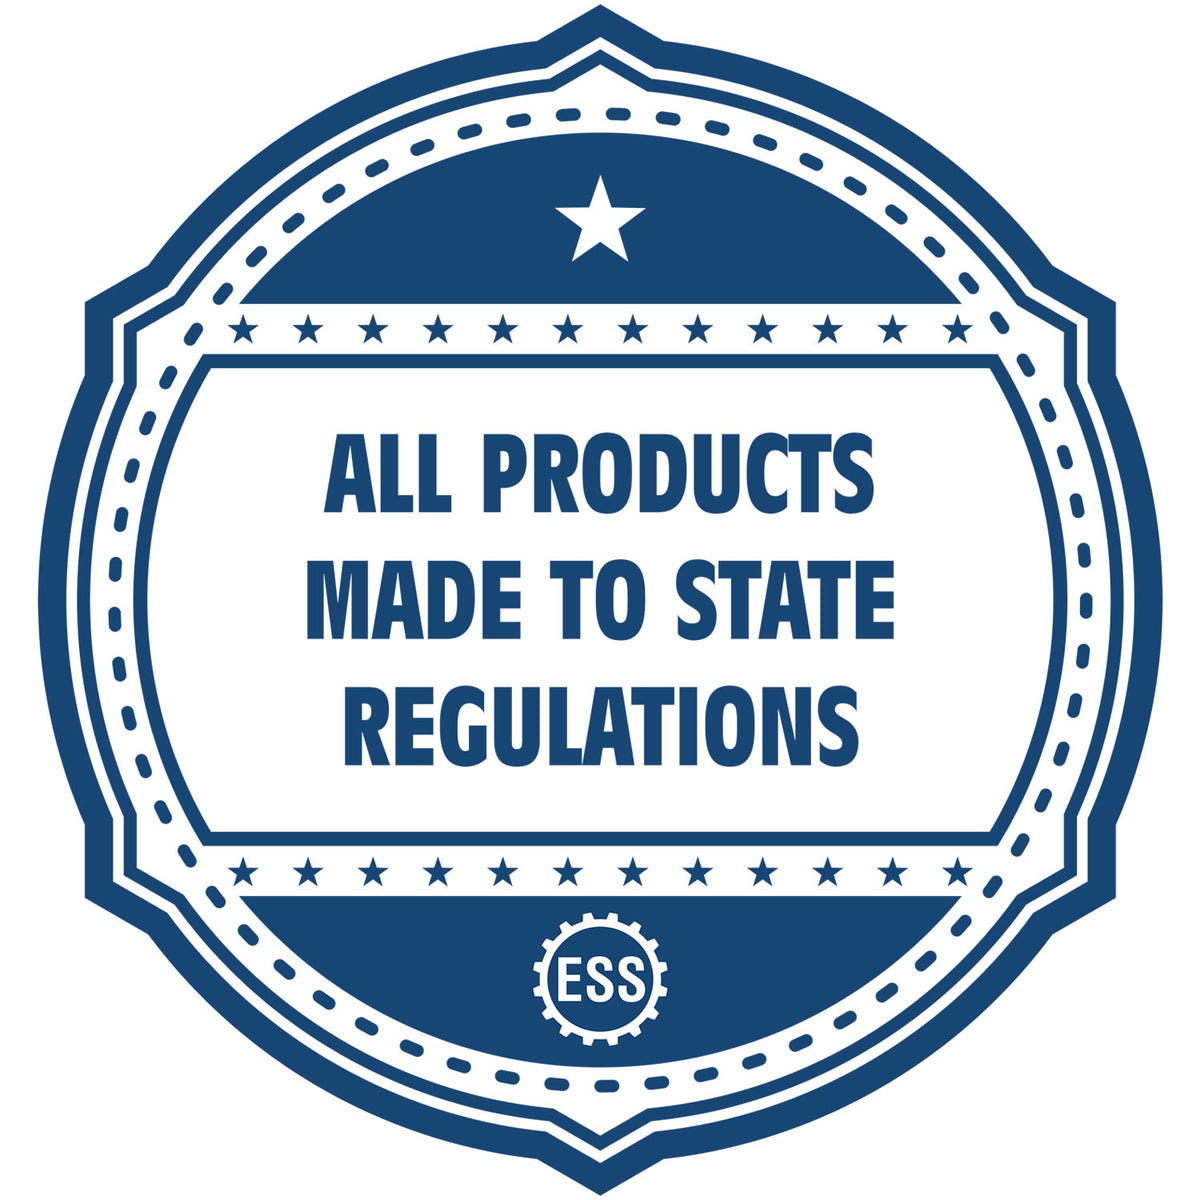 An icon or badge element for the Extended Long Reach New Jersey Architect Seal Embosser showing that this product is made in compliance with state regulations.